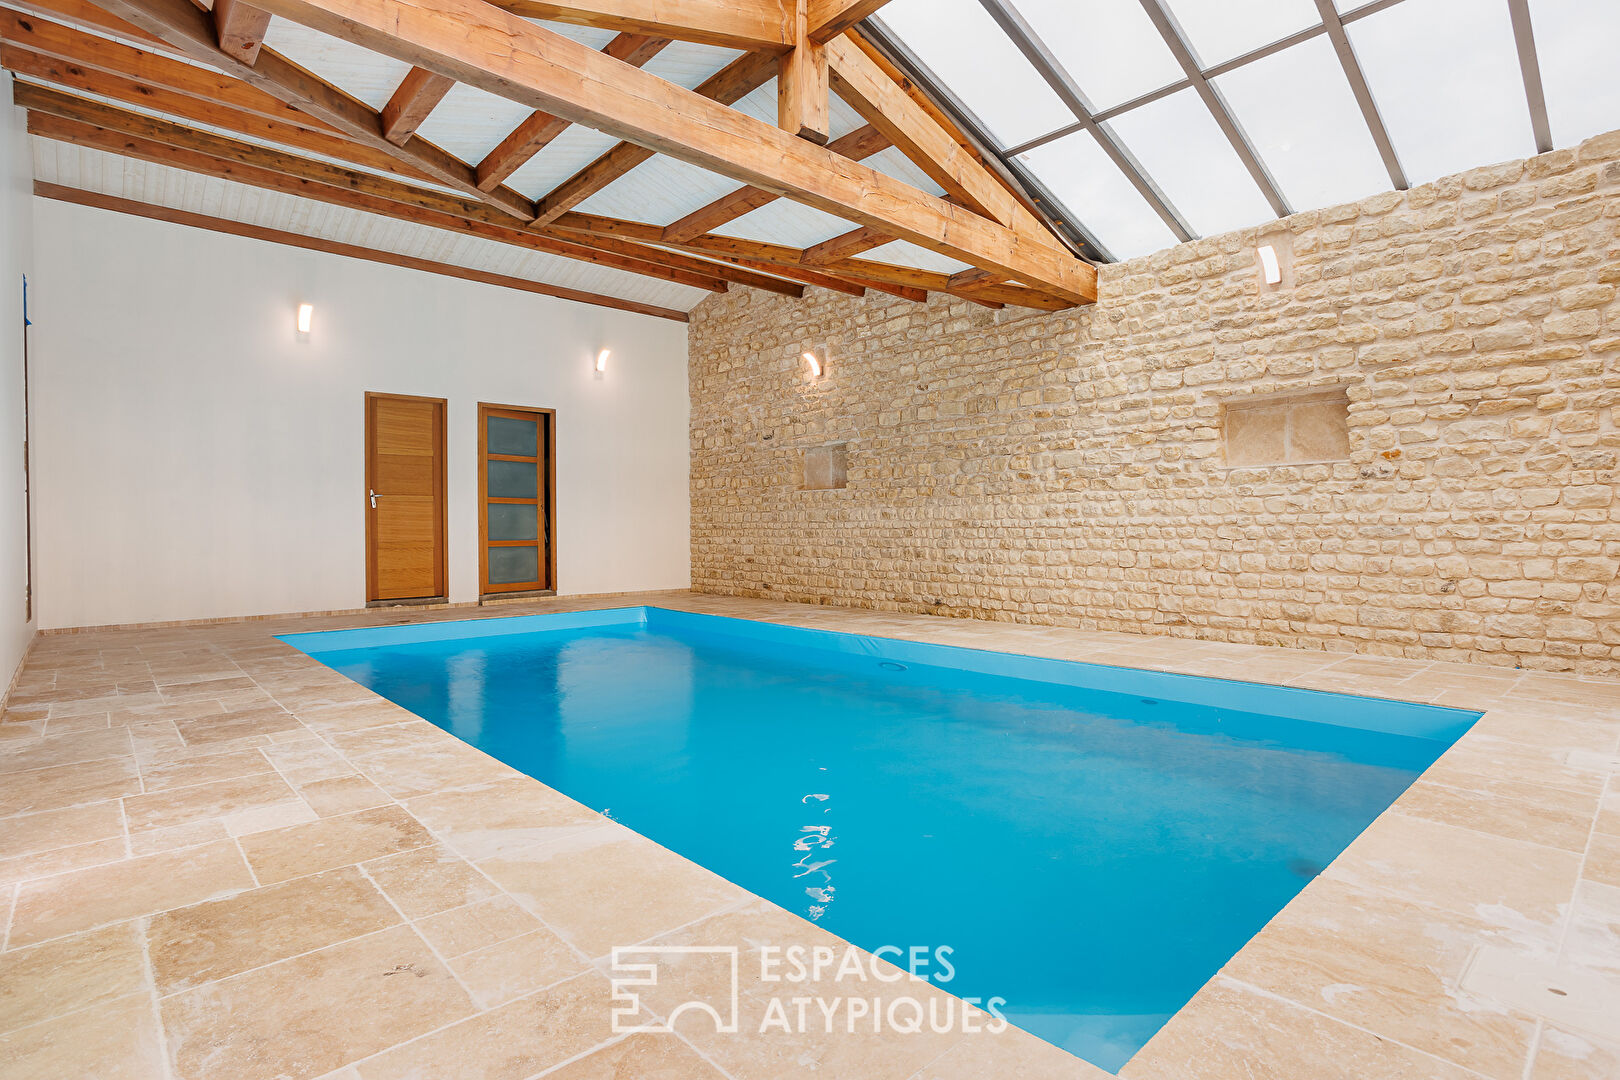 Exceptional Rétaise with its indoor swimming pool